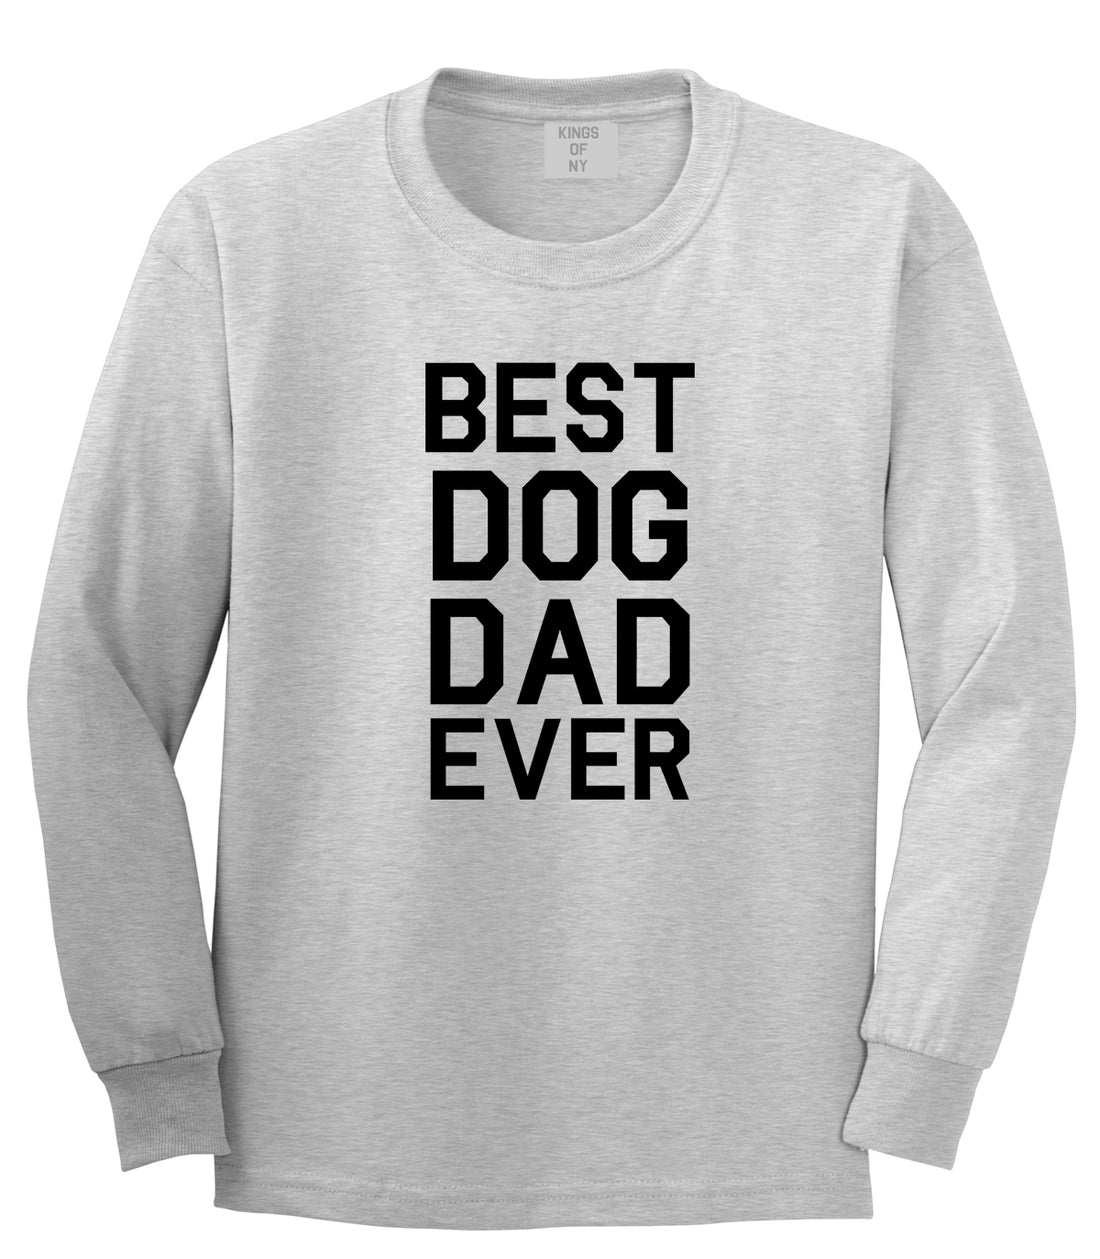 Best Dog Dad Ever Mens Grey Long Sleeve T-Shirt by Kings Of NY